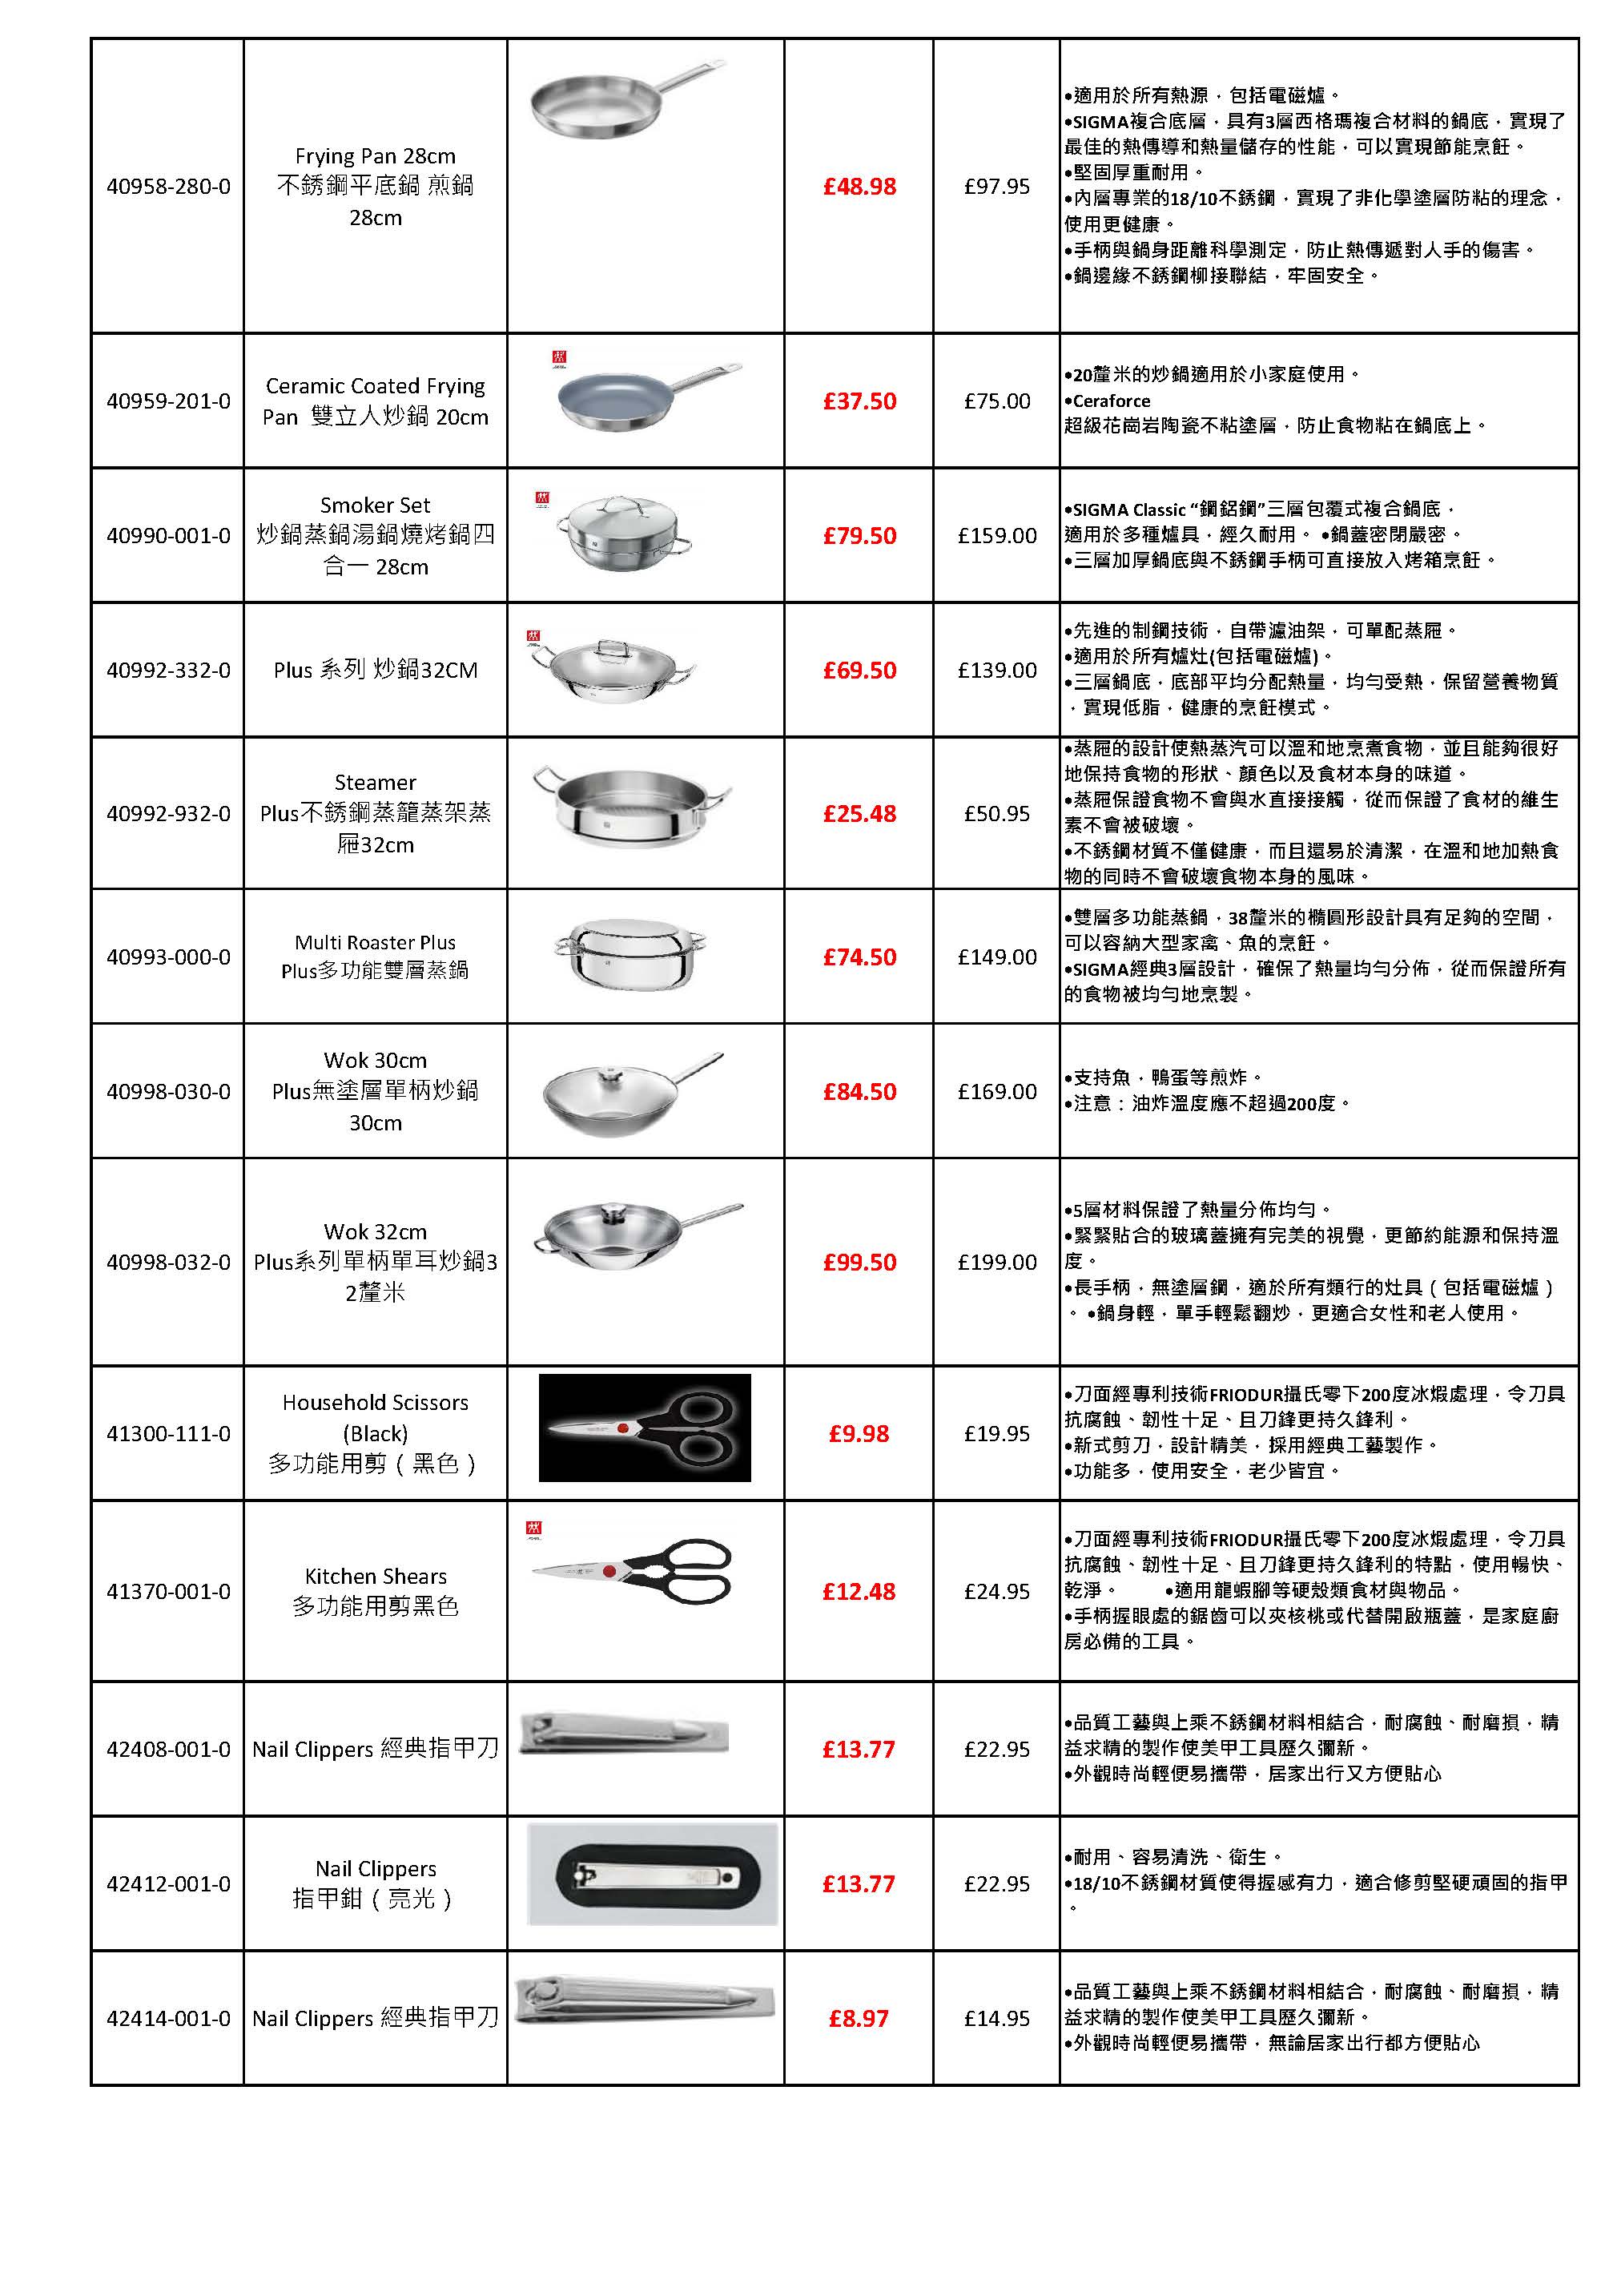 01032017 Britsense Full Sales List Traditional Chinese Version_Page_4.jpg